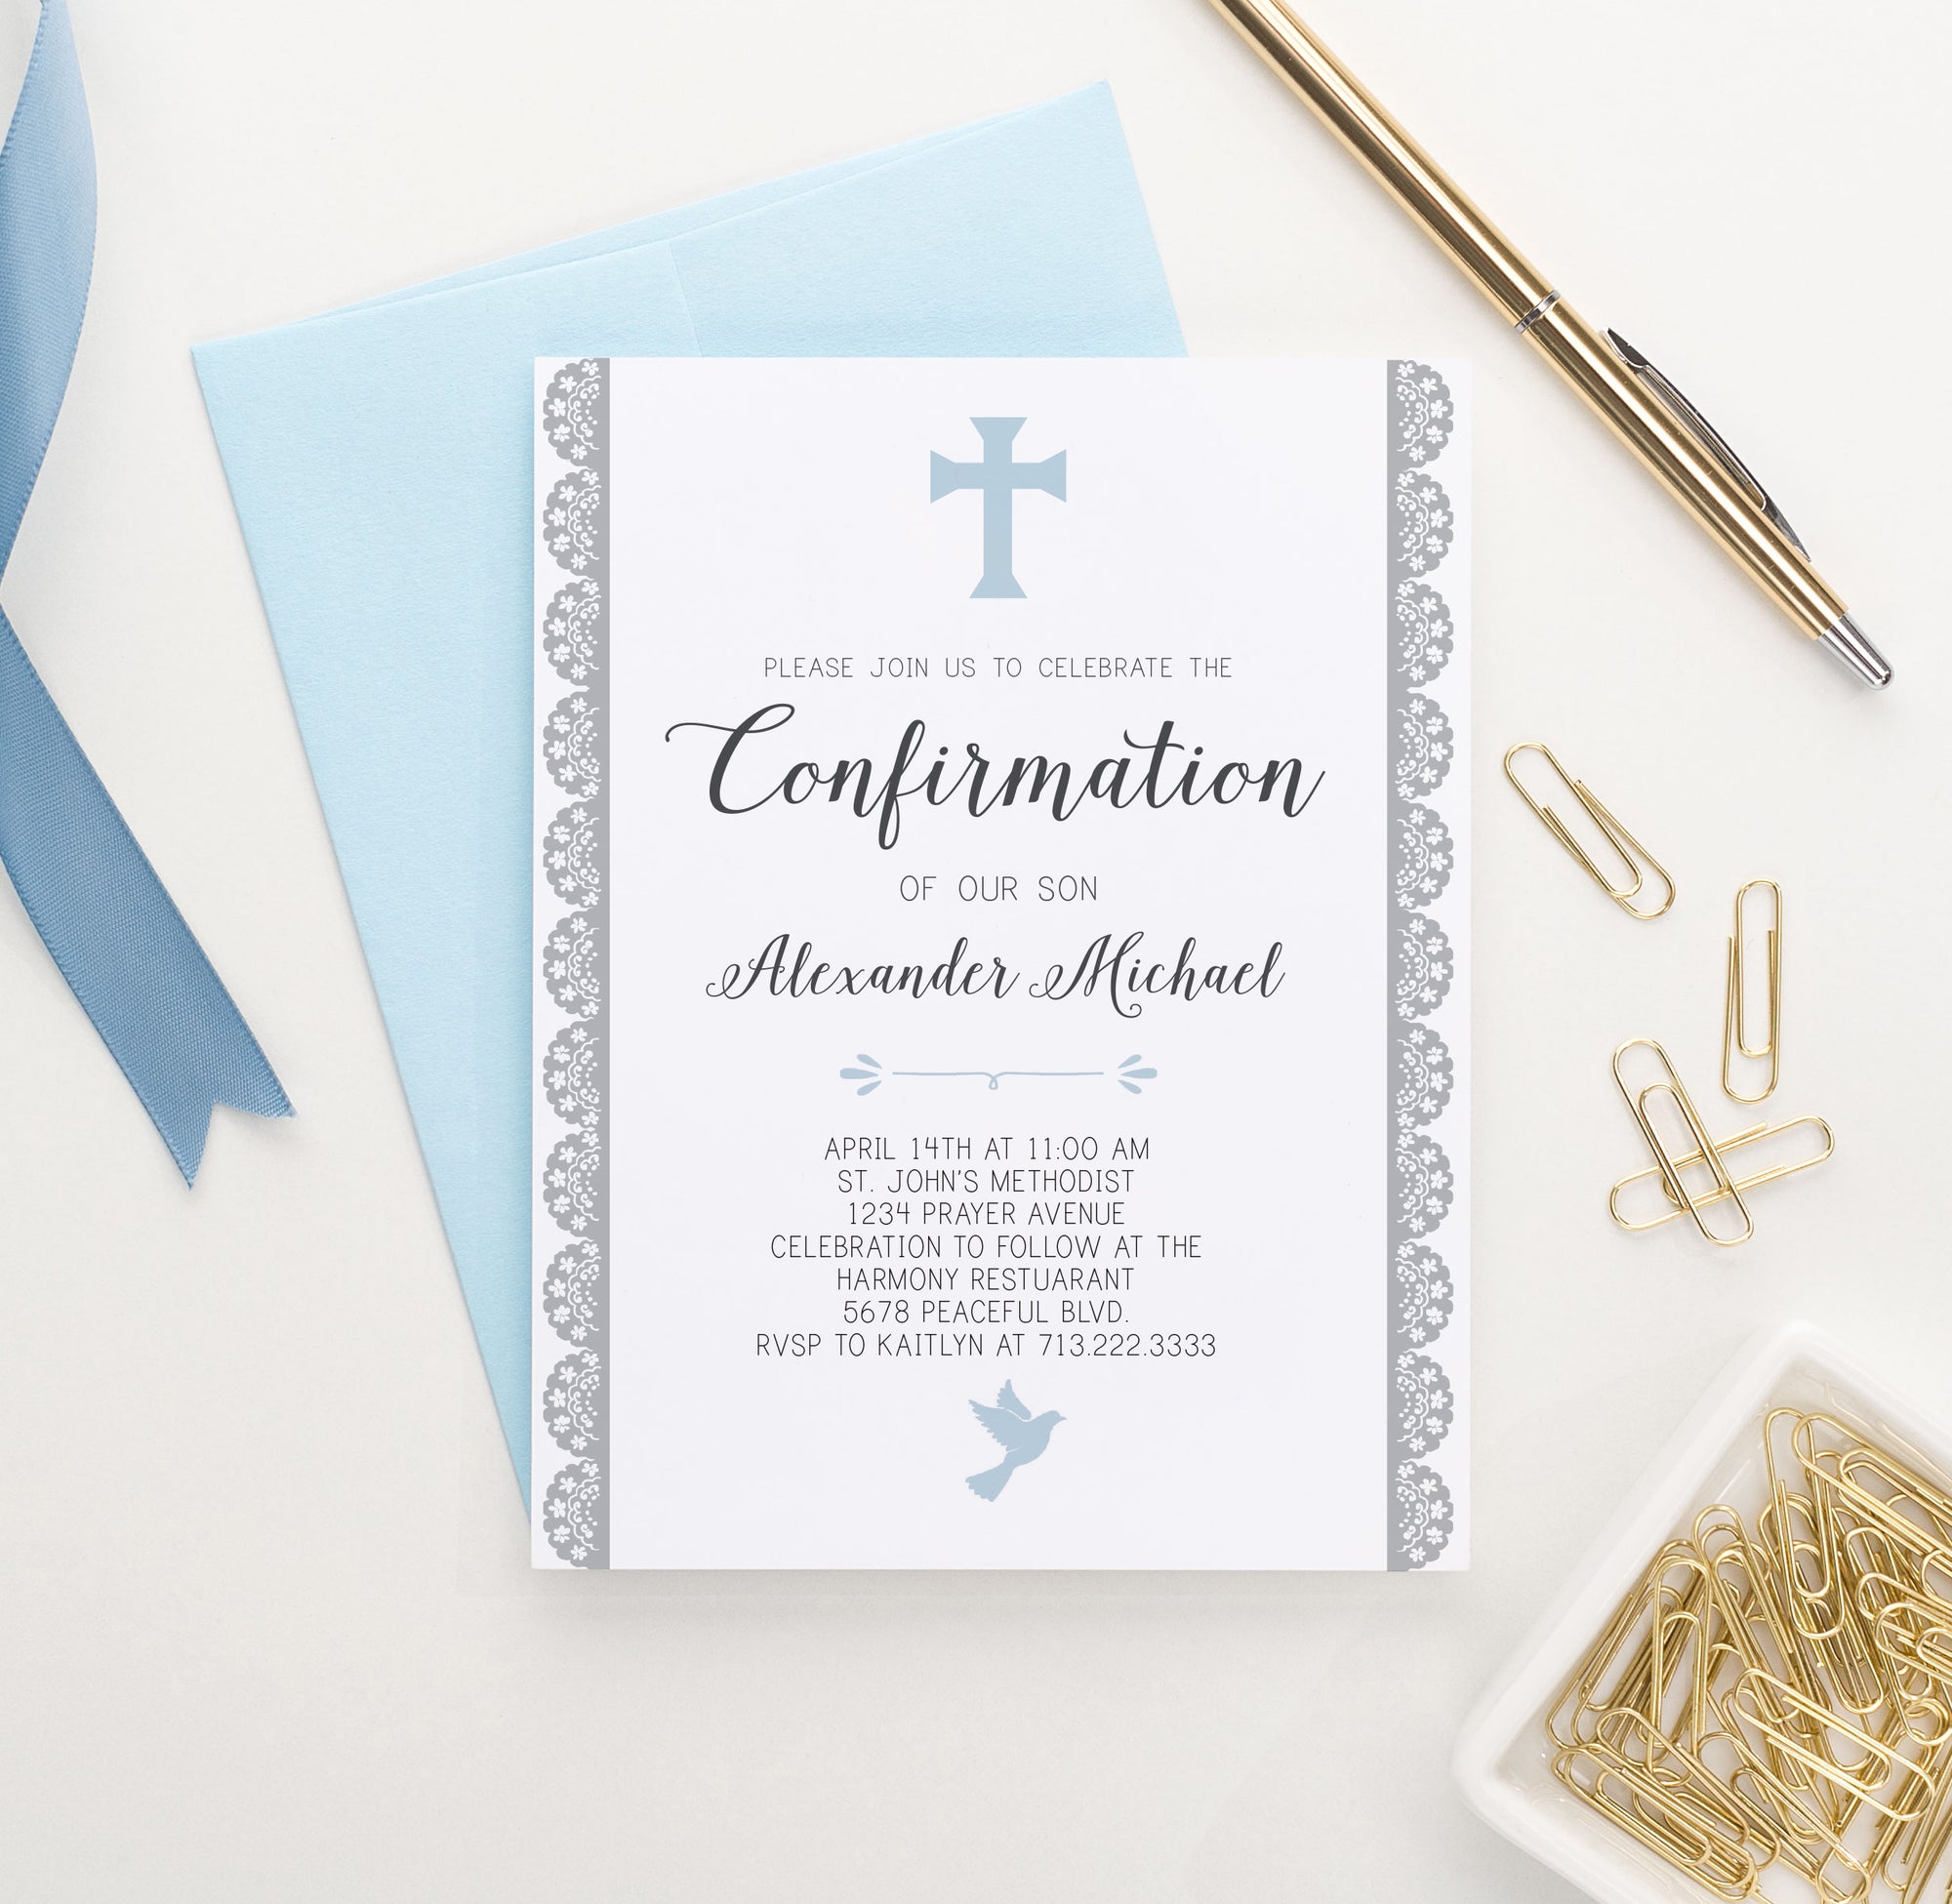 Personalized Blue Confirmation Invitation Cards With Lace